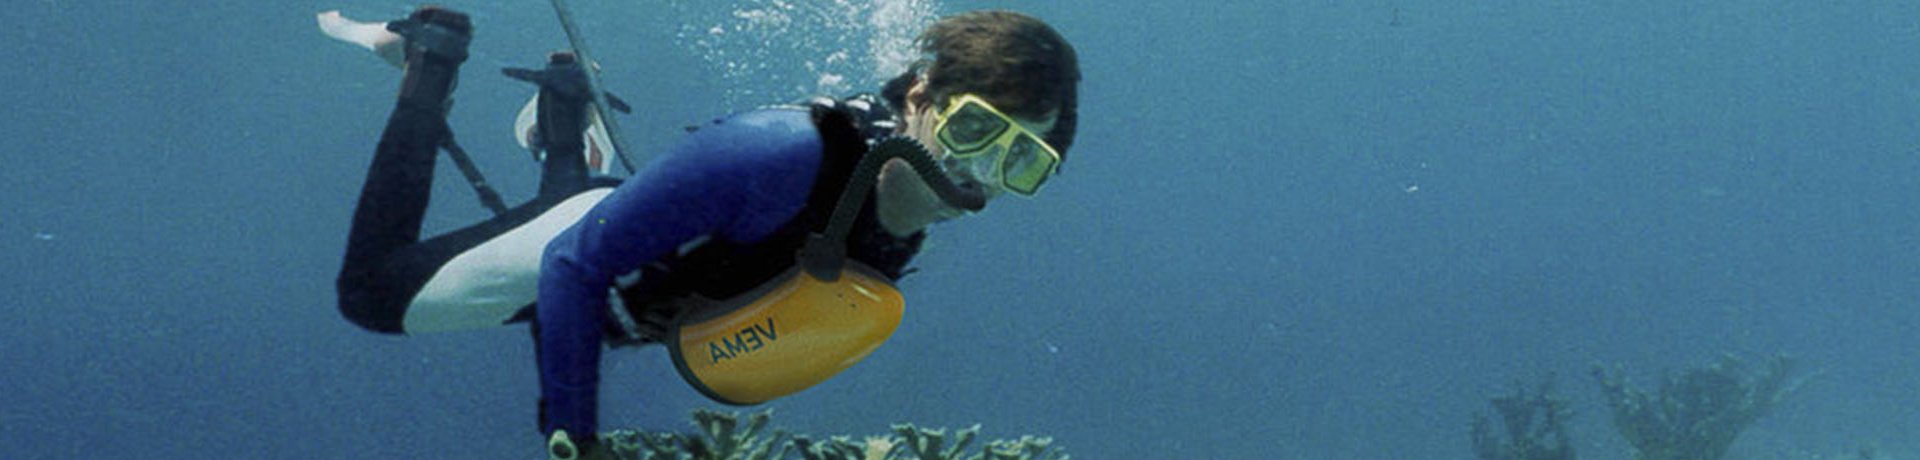 EXOlung underwater breathing apparatus for diving